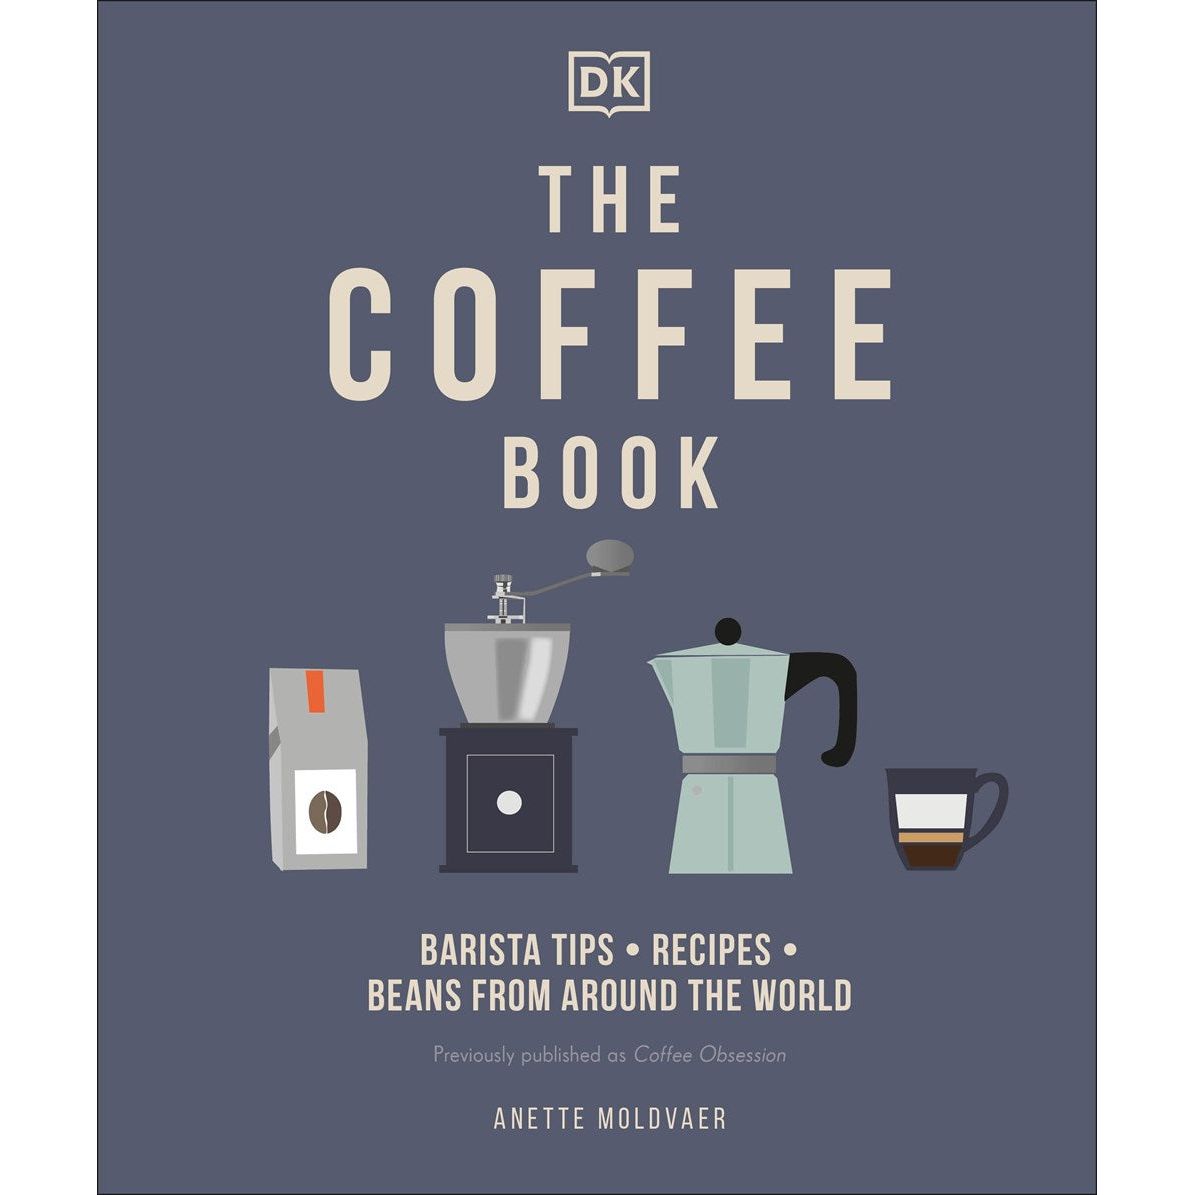 The Coffee Book: Barista Tips * Recipes * Beans from Around the